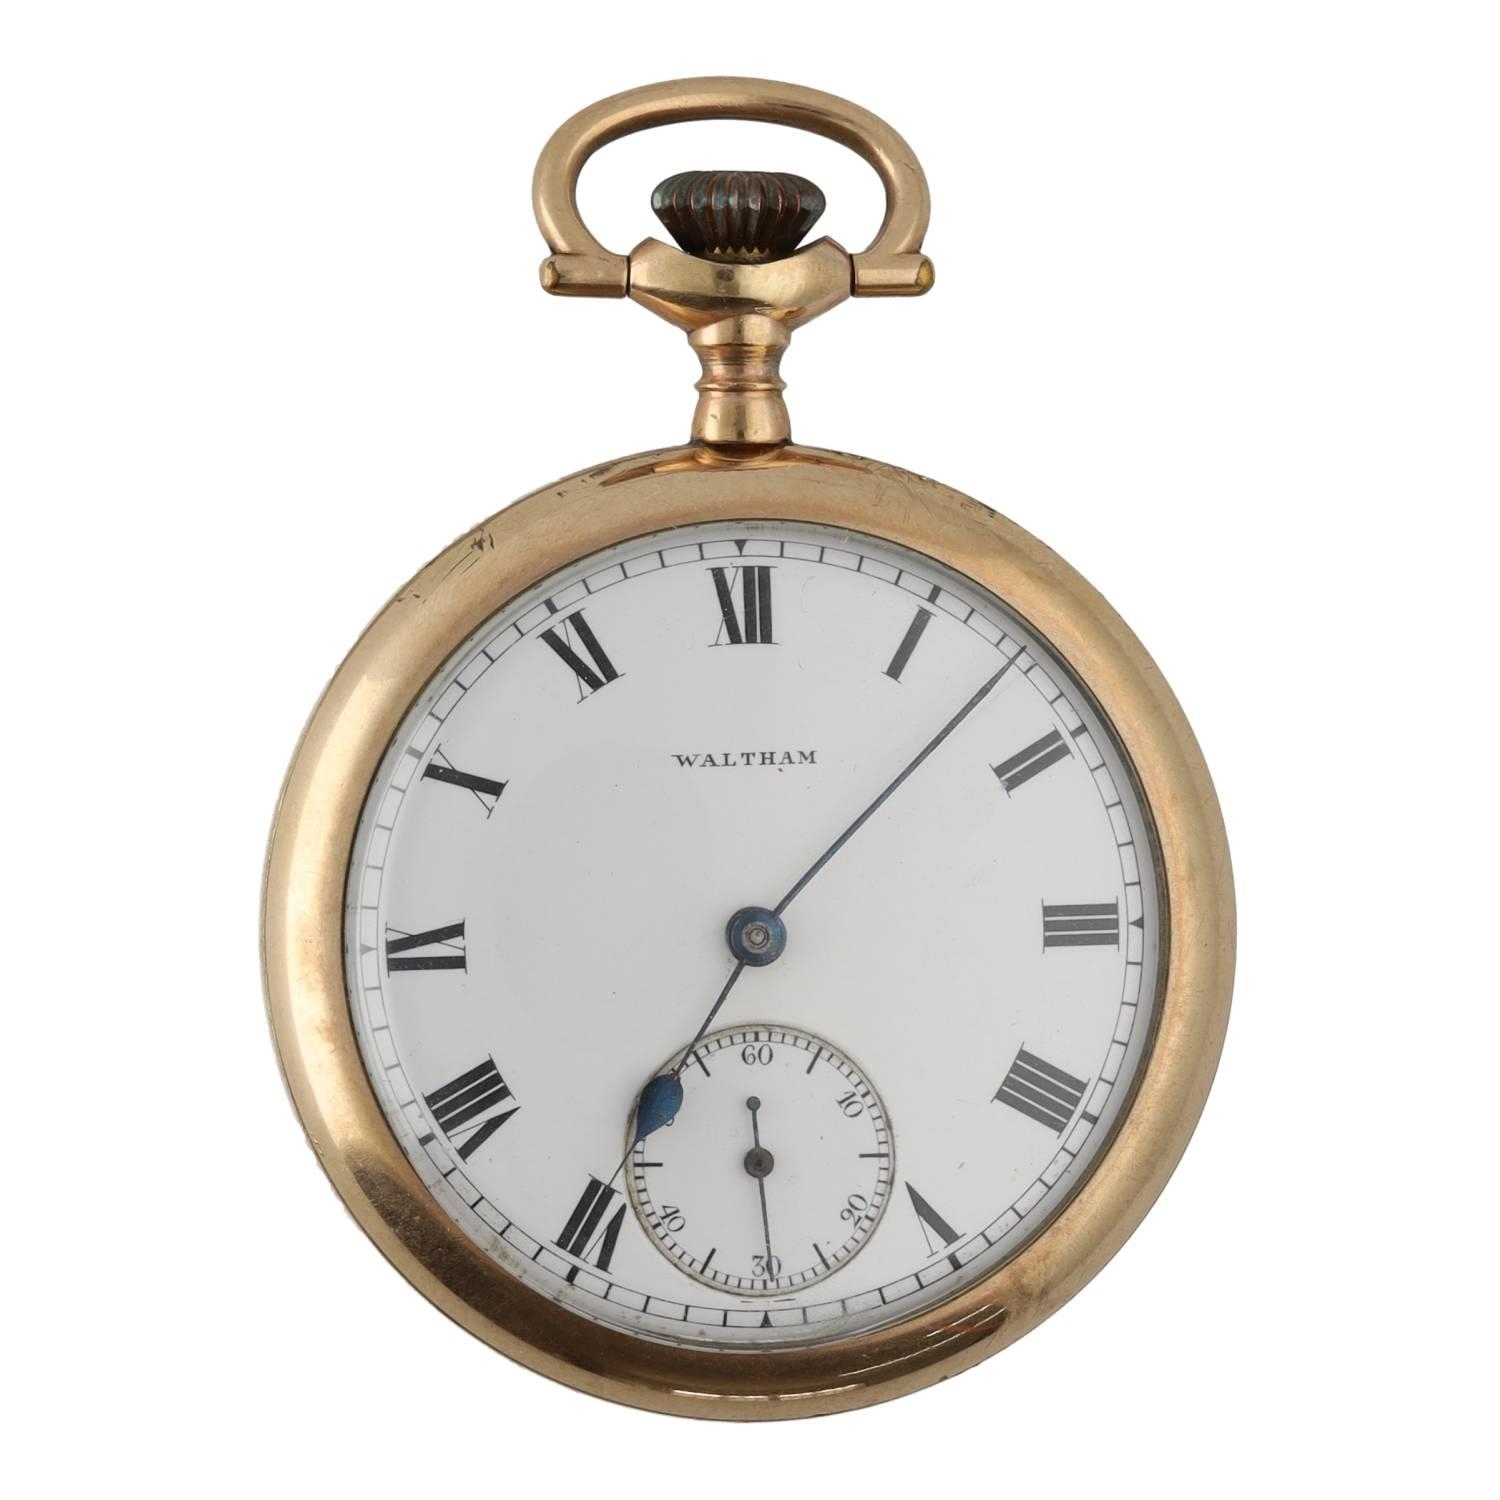 American Waltham 'Traveler' gold plated lever pocket watch, circa 1902, serial no. 11399670, - Image 2 of 4